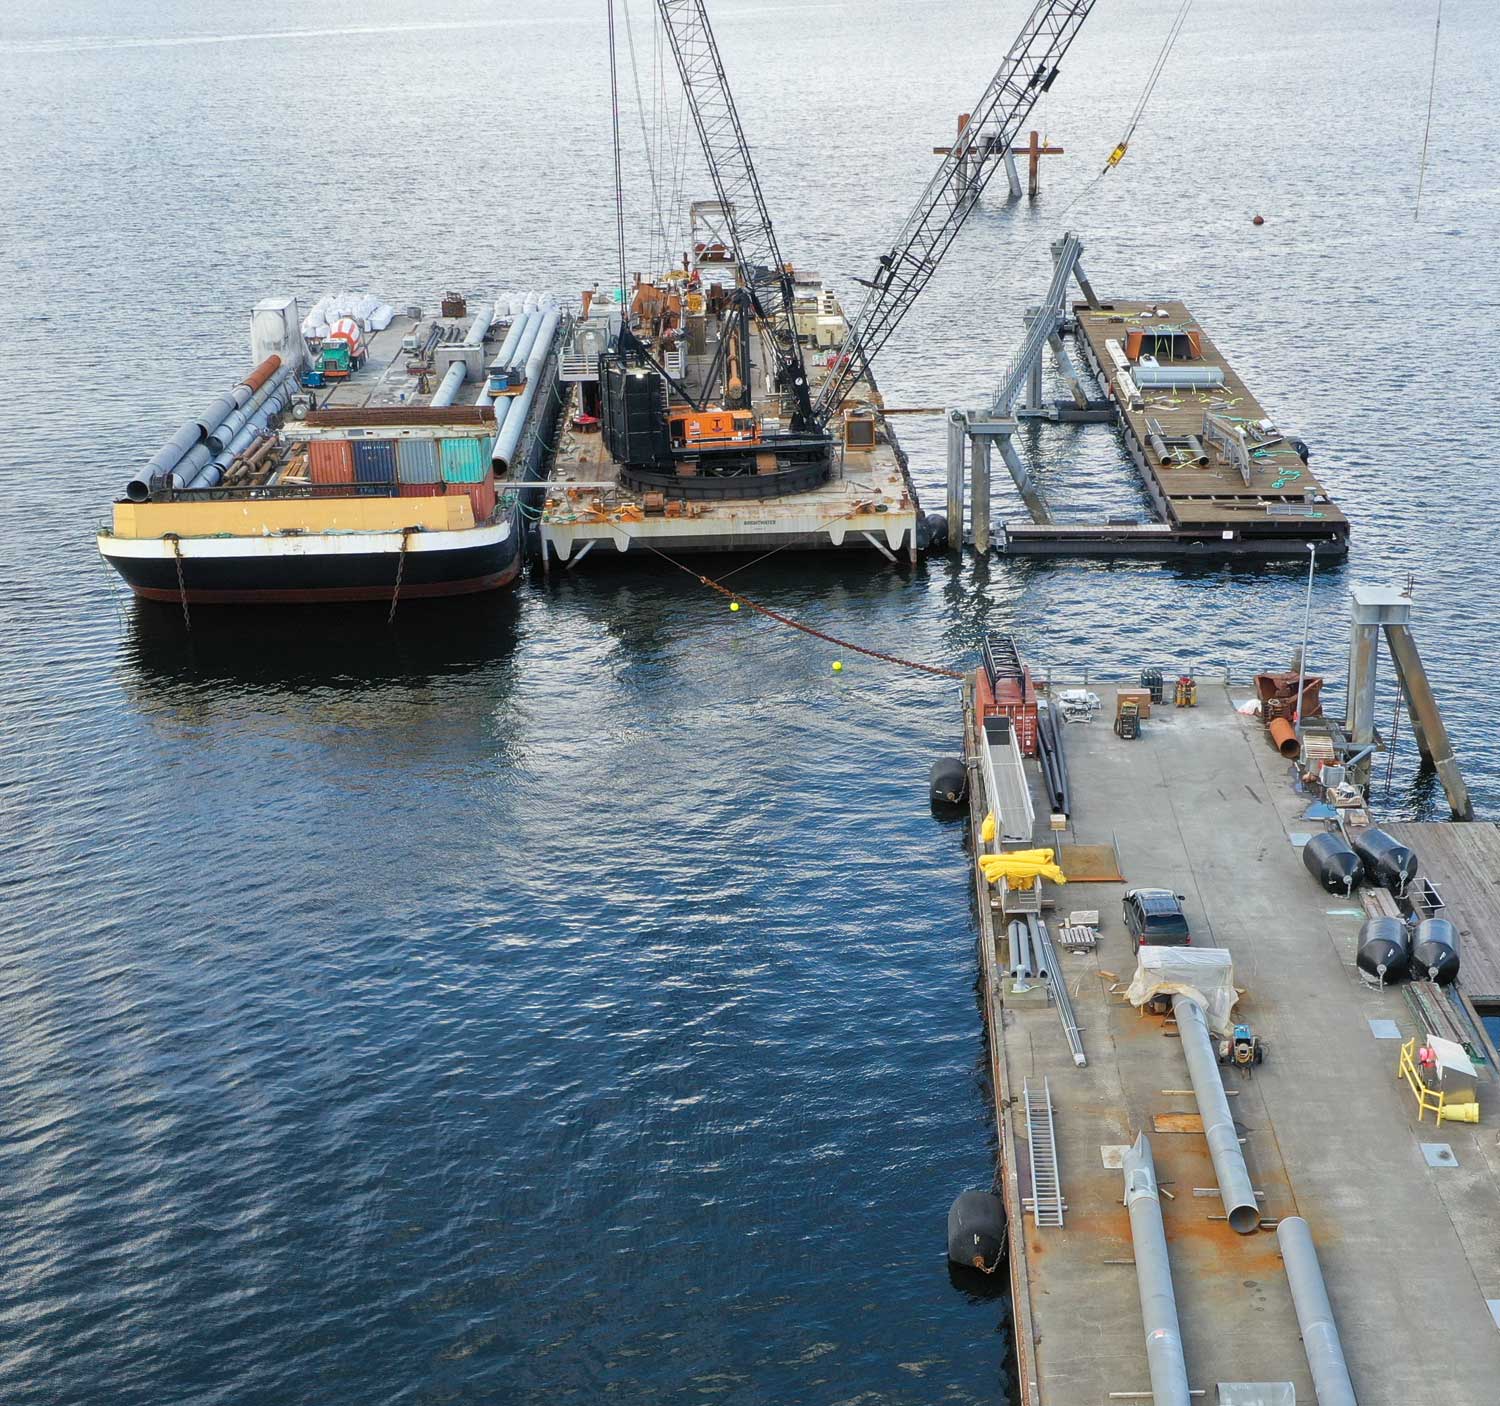 The Halibut Point dock expansion project being completed and expected by June